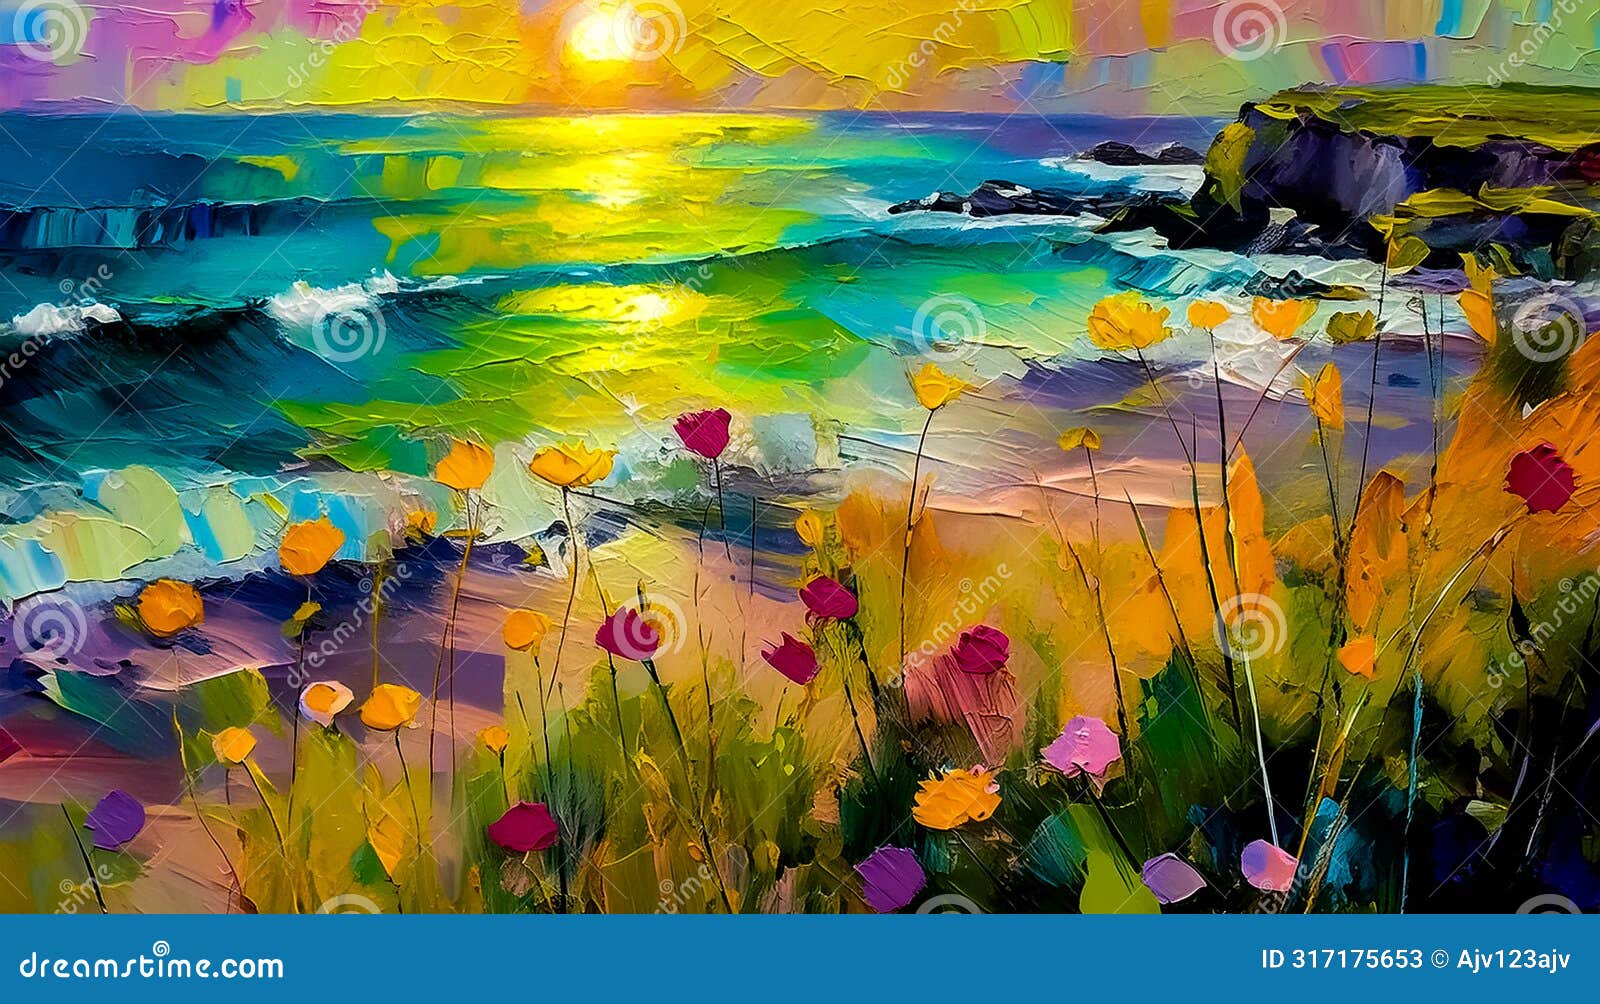 an impressionist oil painting style image of a seaside landscape